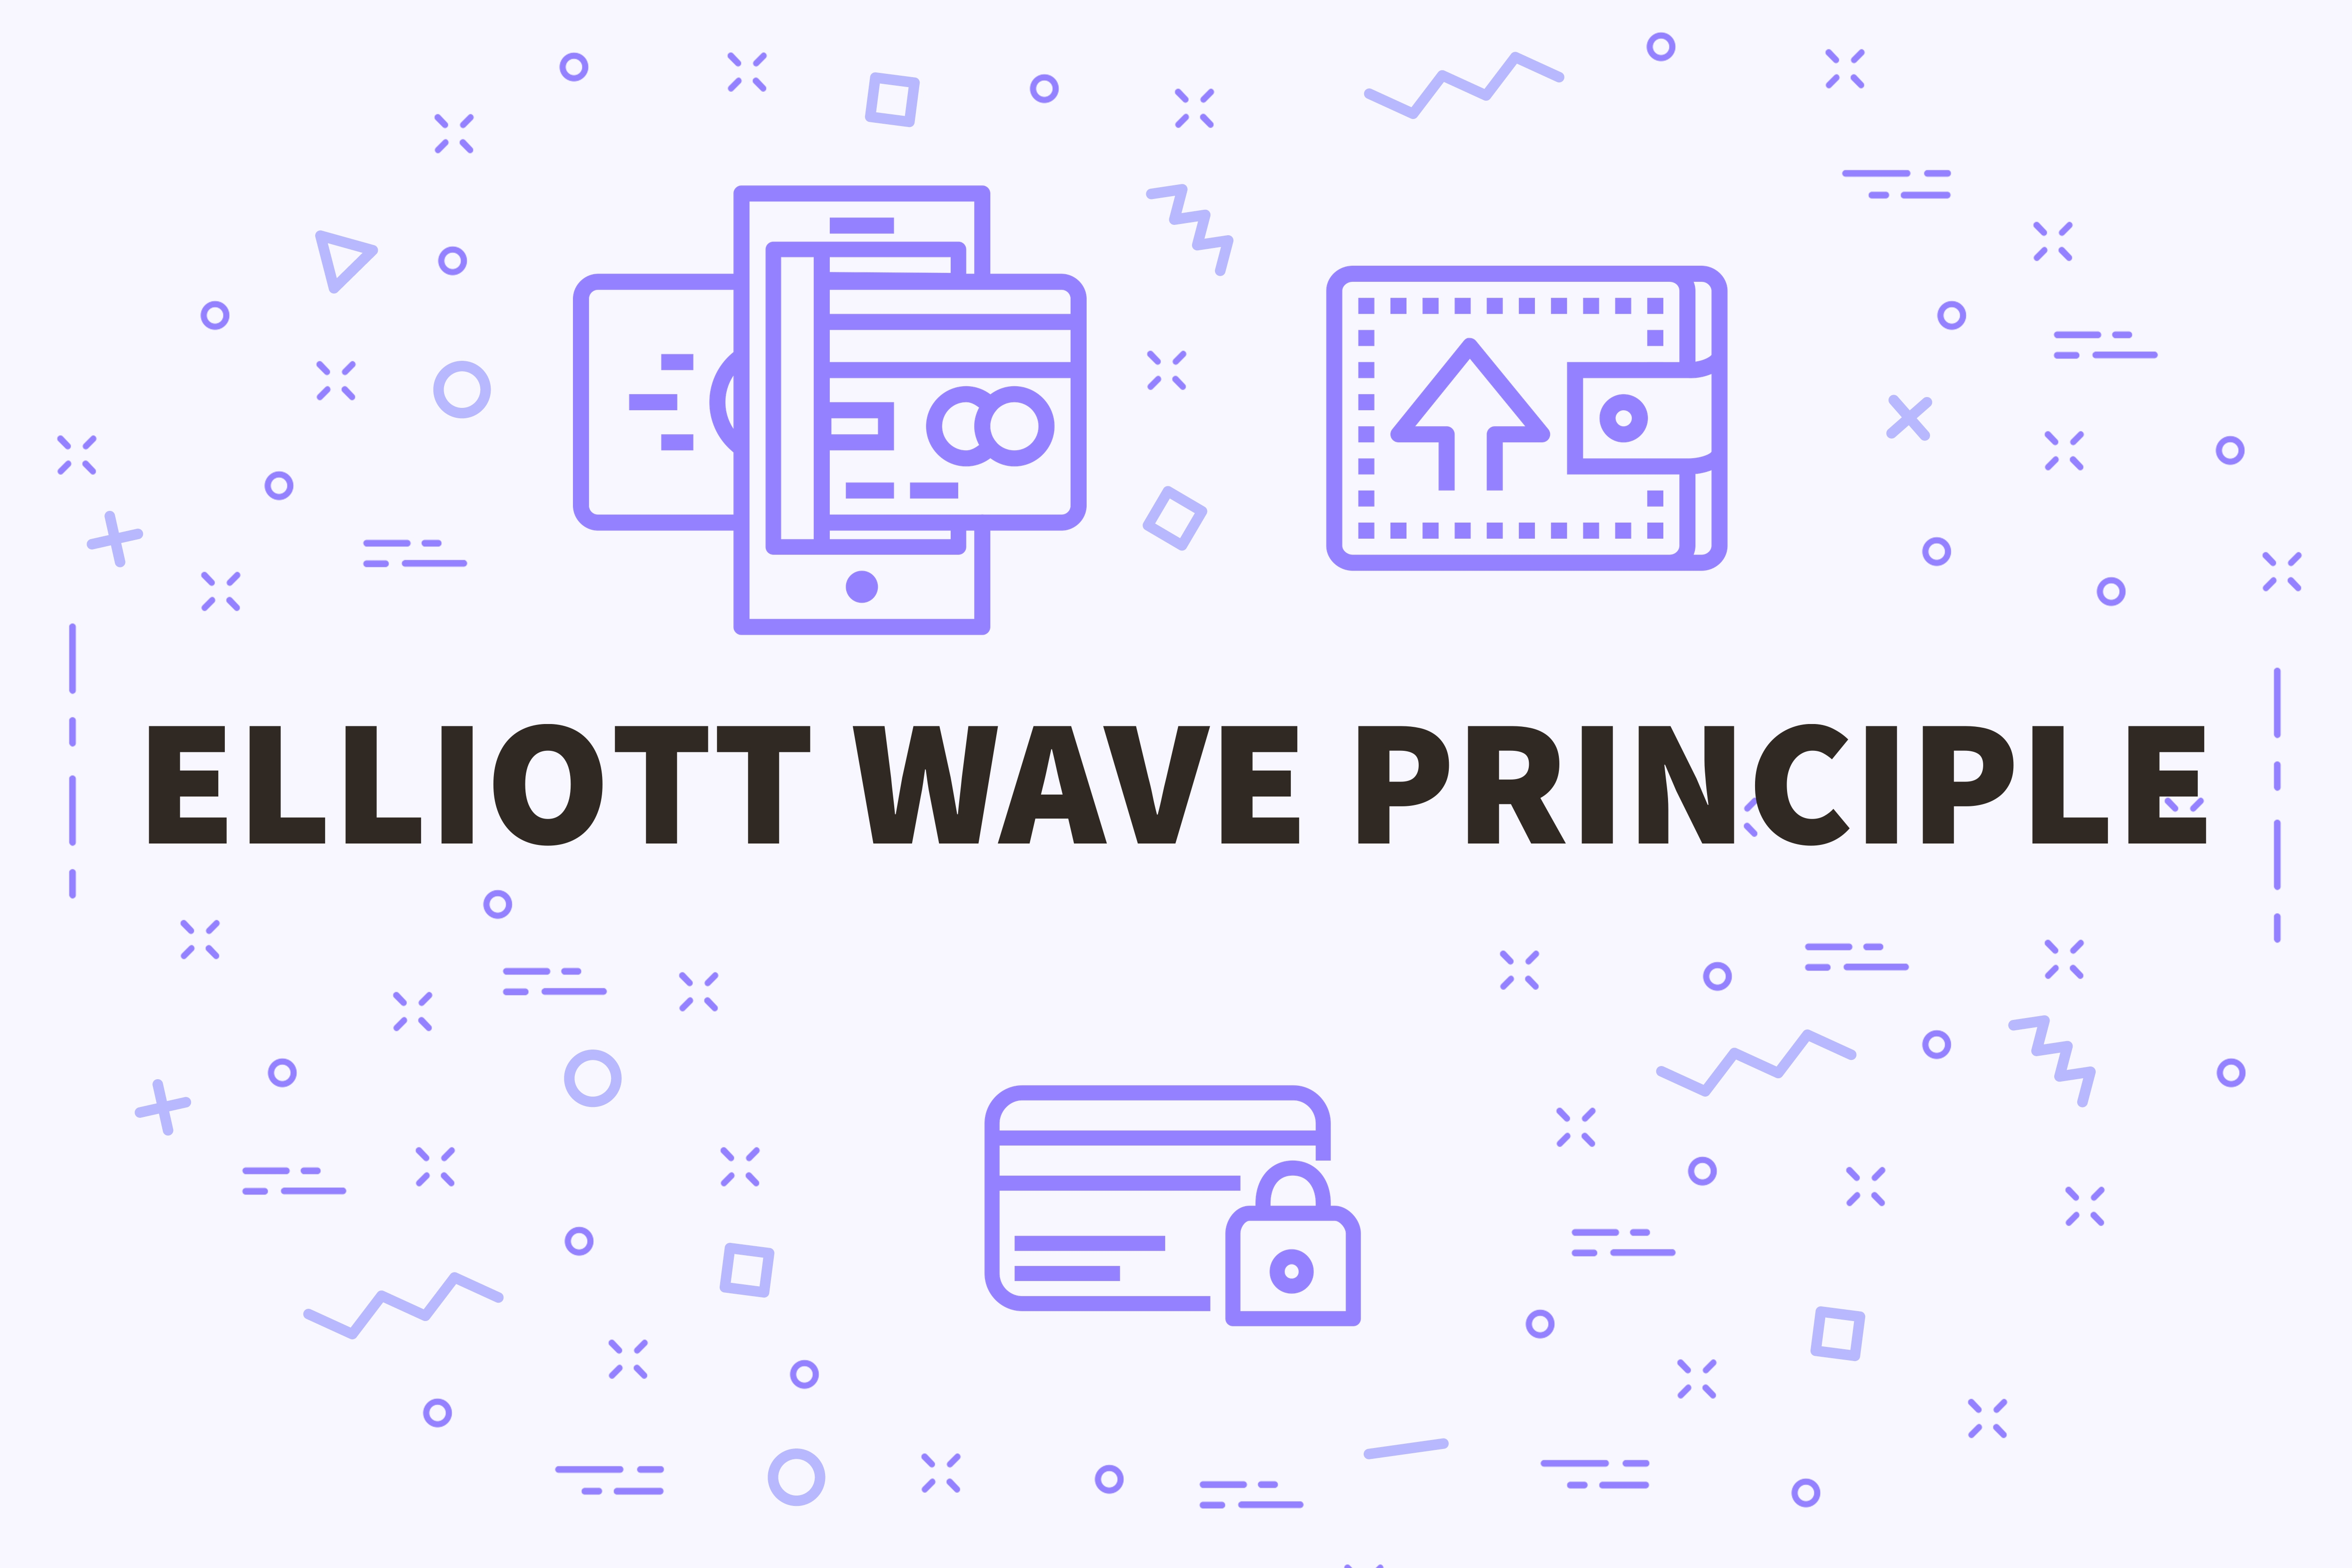 Elliott Wave Theory - What It Is and How It Works